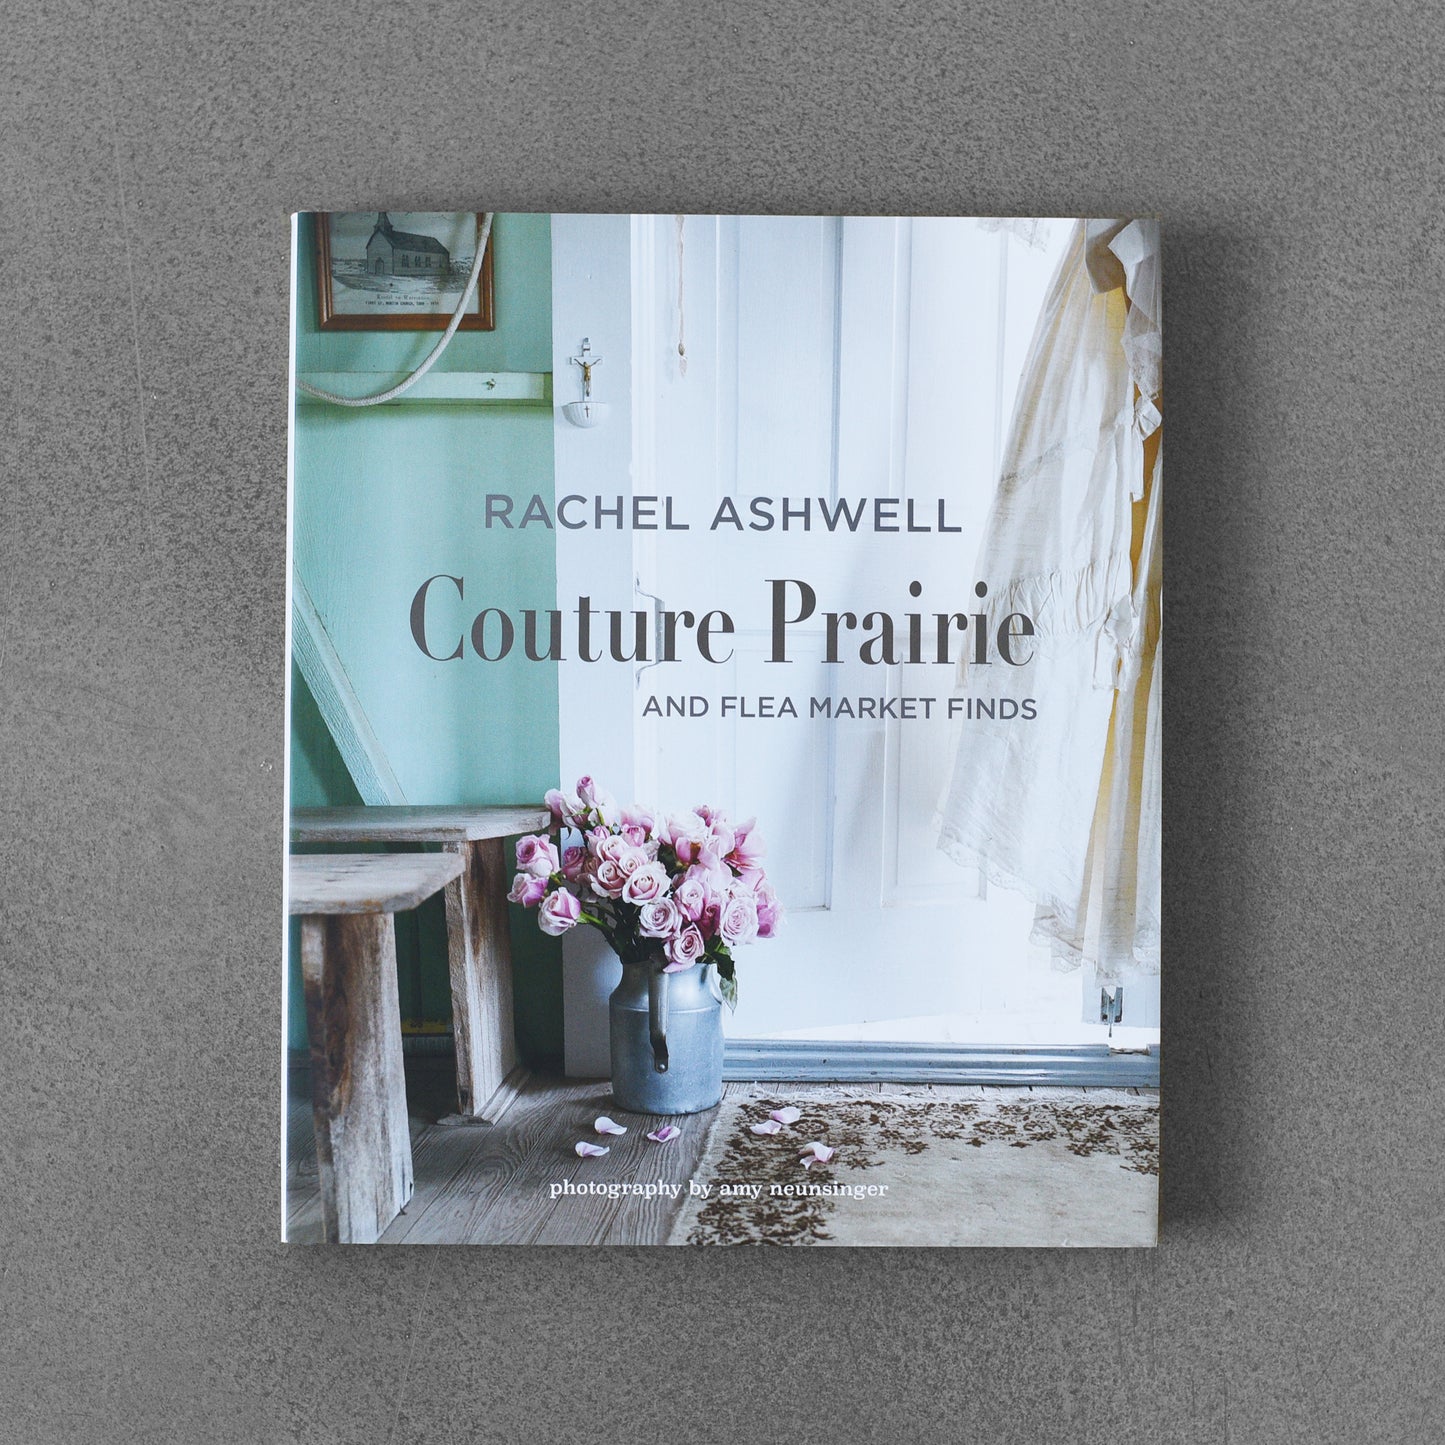 Couture Prairie: And Flea Market Finds - Rachel Ashwell